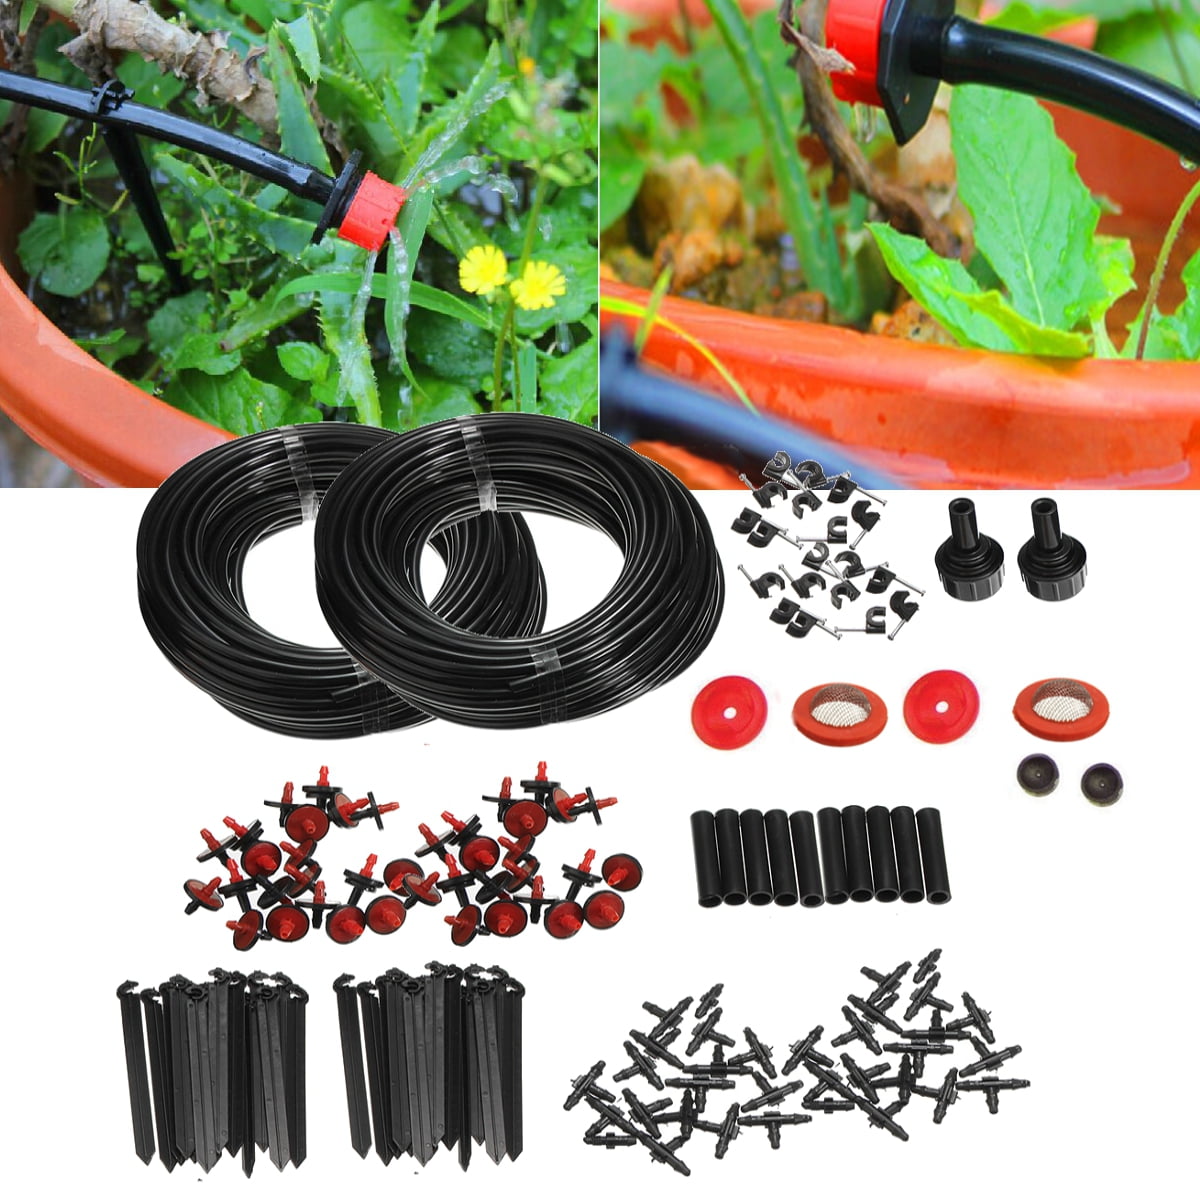 150FT Micro Drip Irrigation Self Watering Automatic System Drippers Plant Garden